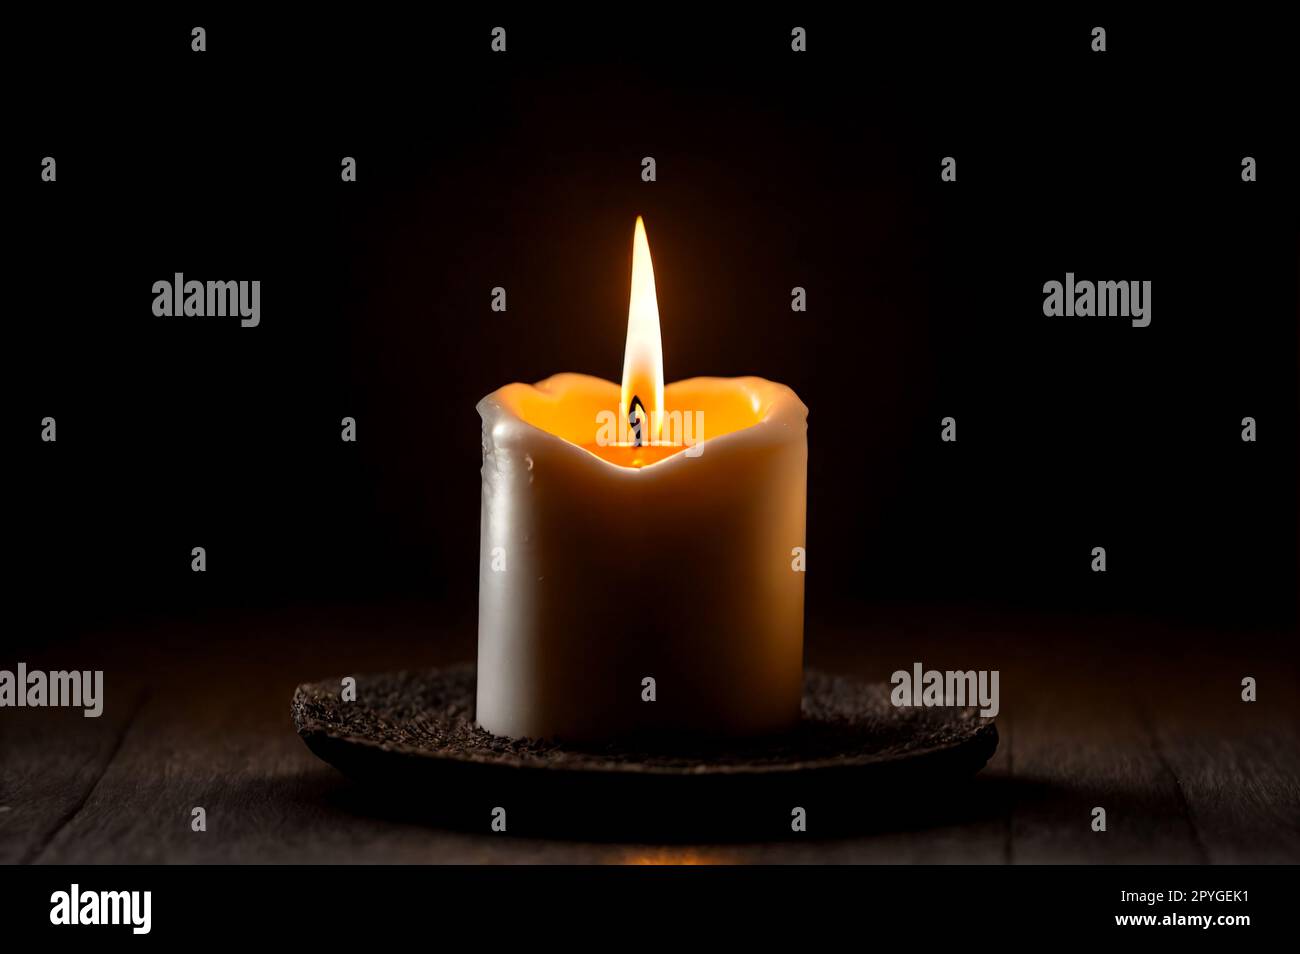 Small burning candle on wooden floor with dark background Stock Photo